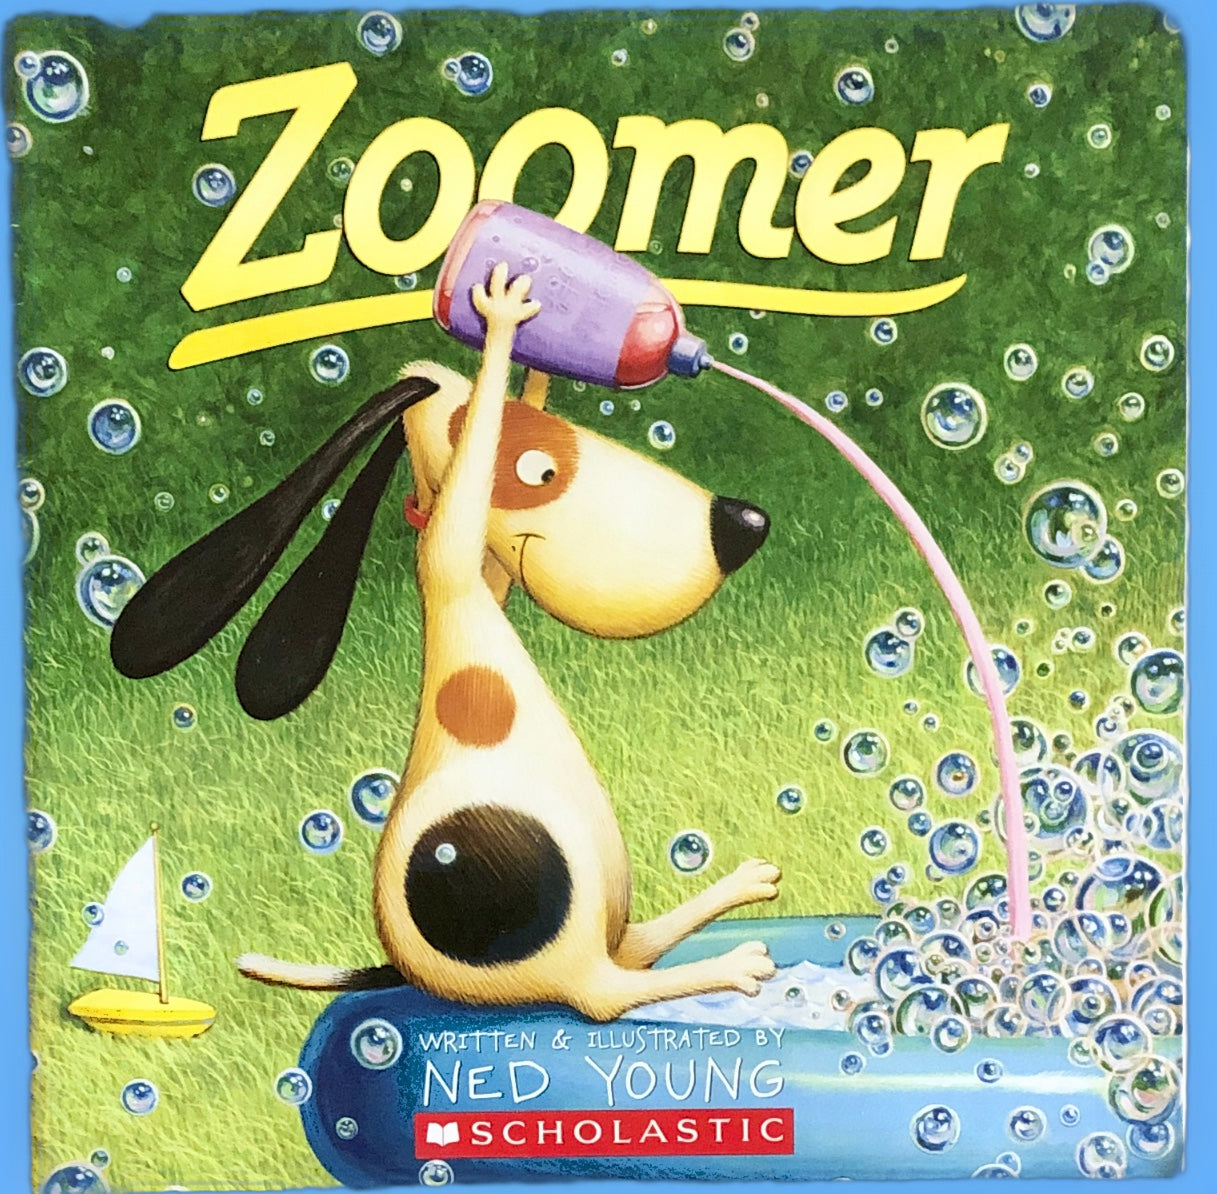 Zoomer by Ned Young